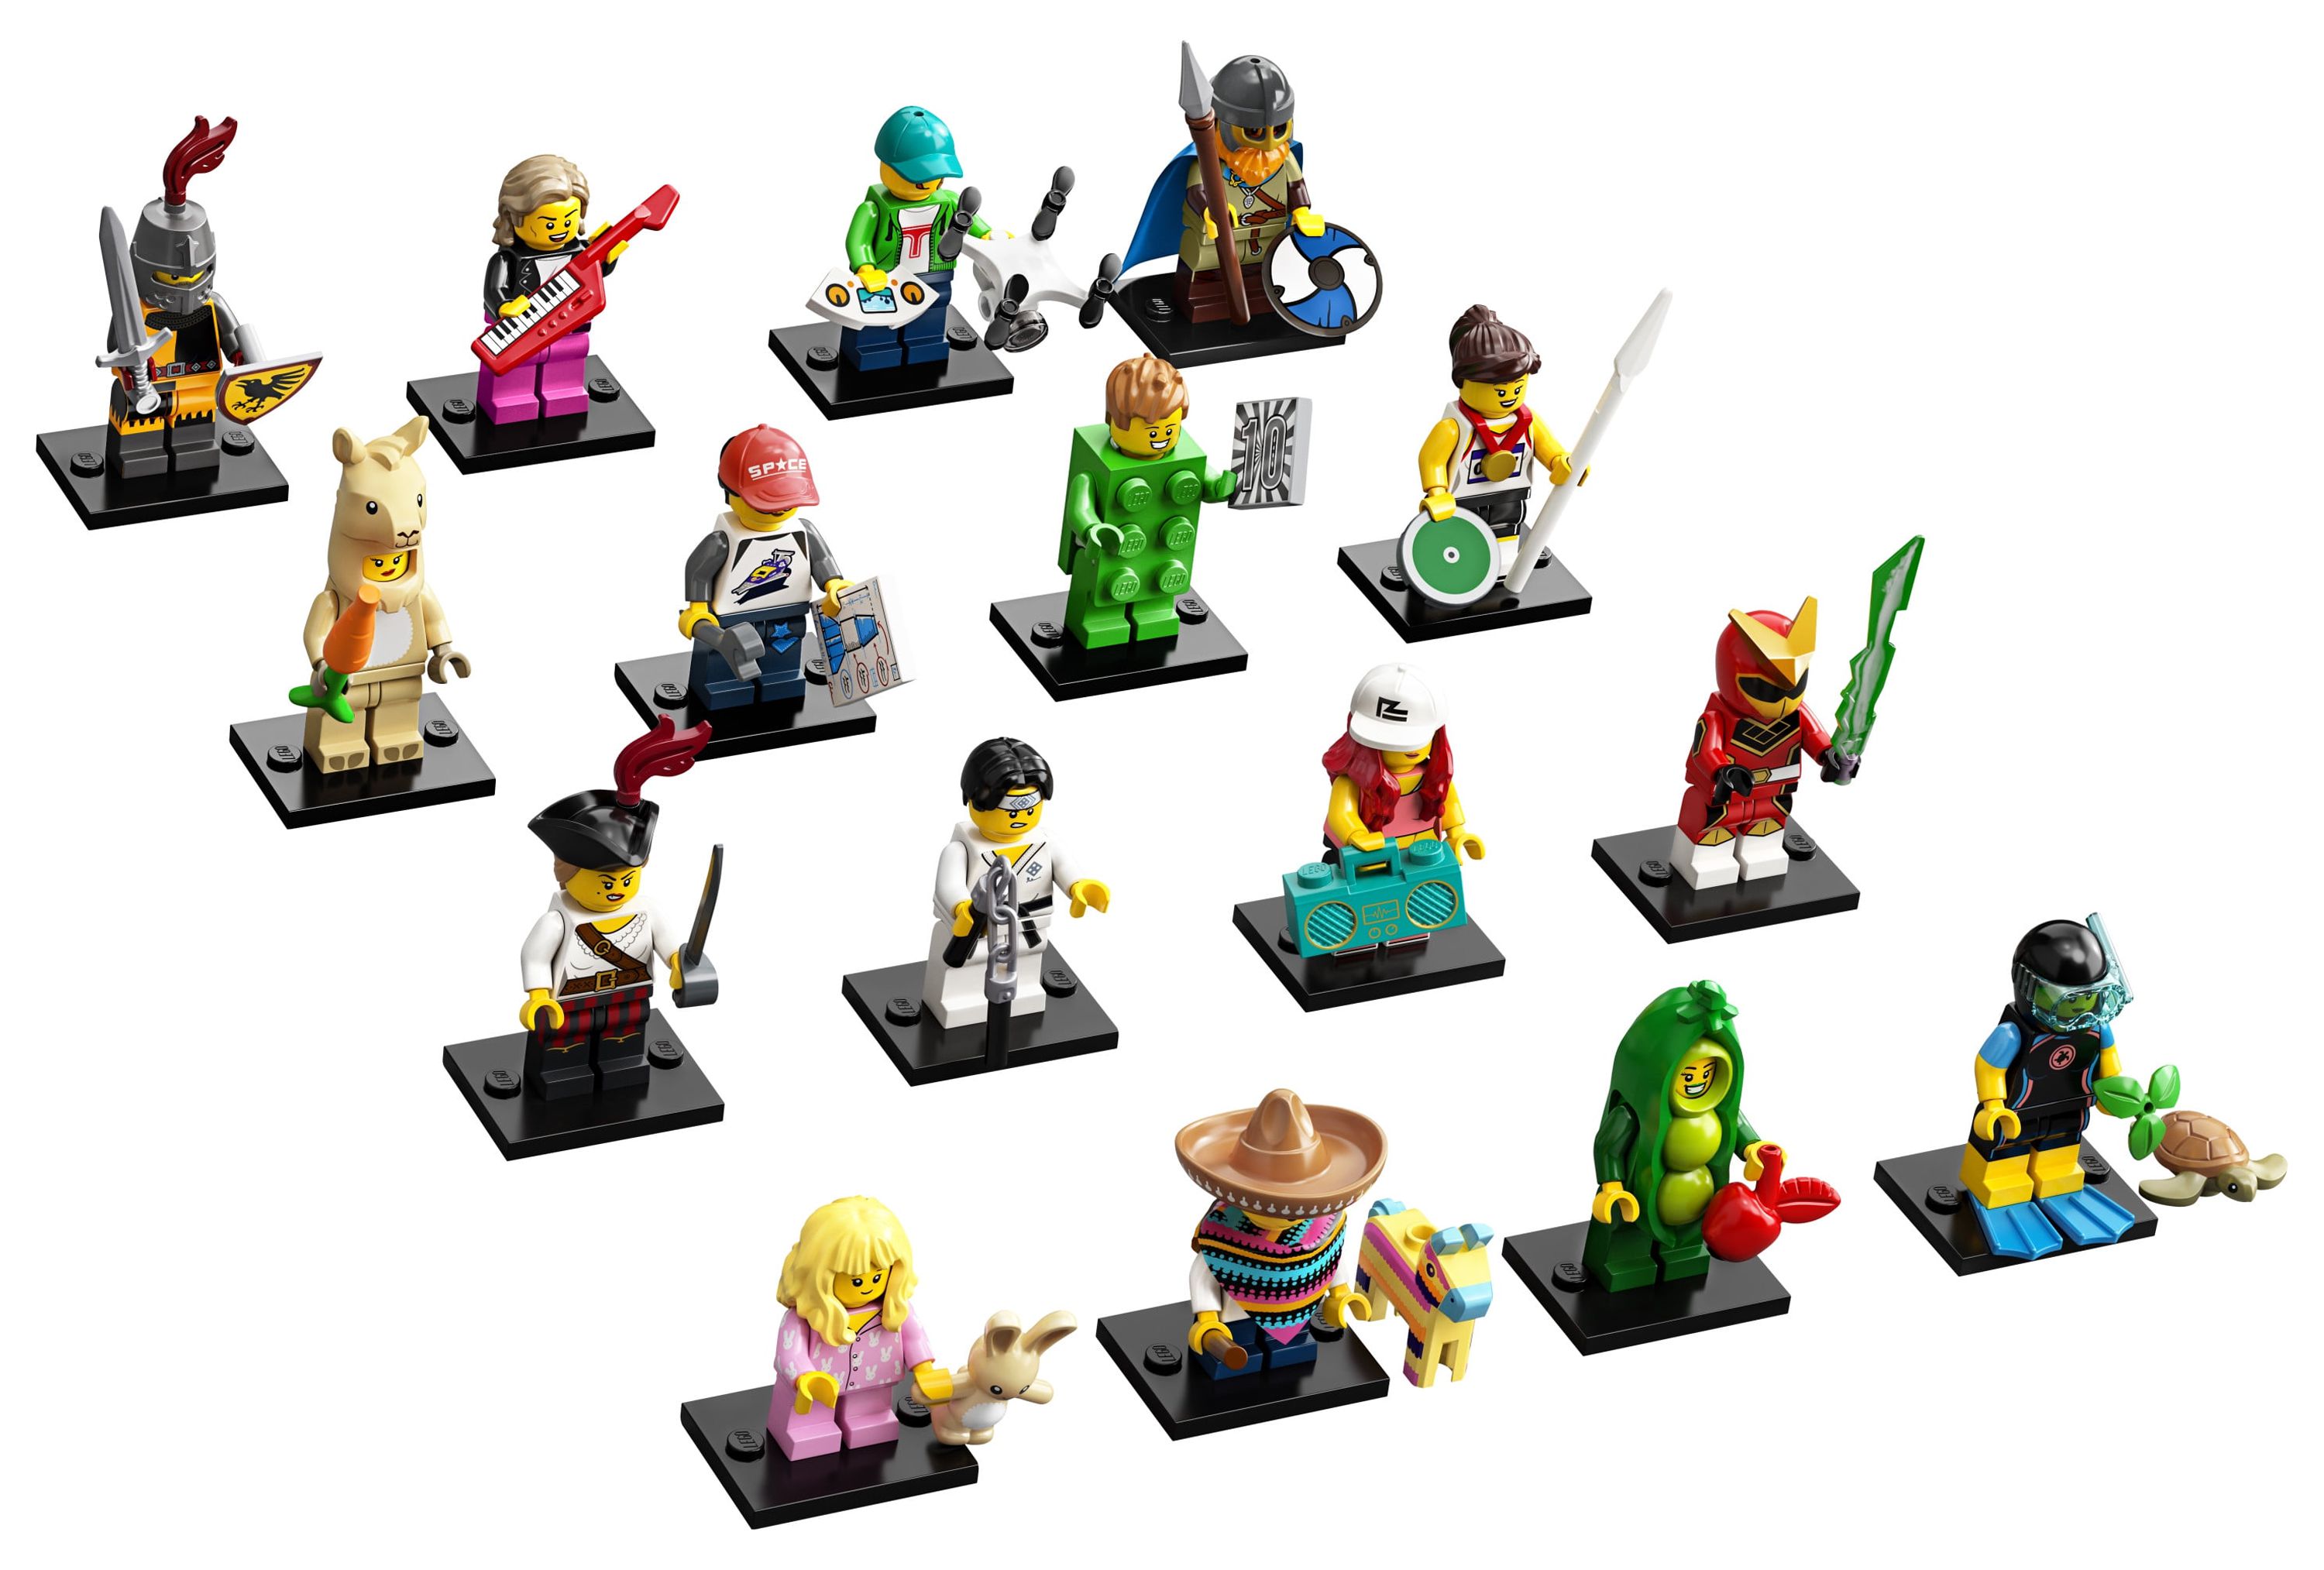 LEGO Minifigures Series 20 71027 Building Kit (1 of 16 to Collect), featuring Characters to Collect and Add to Existing Sets - image 2 of 5